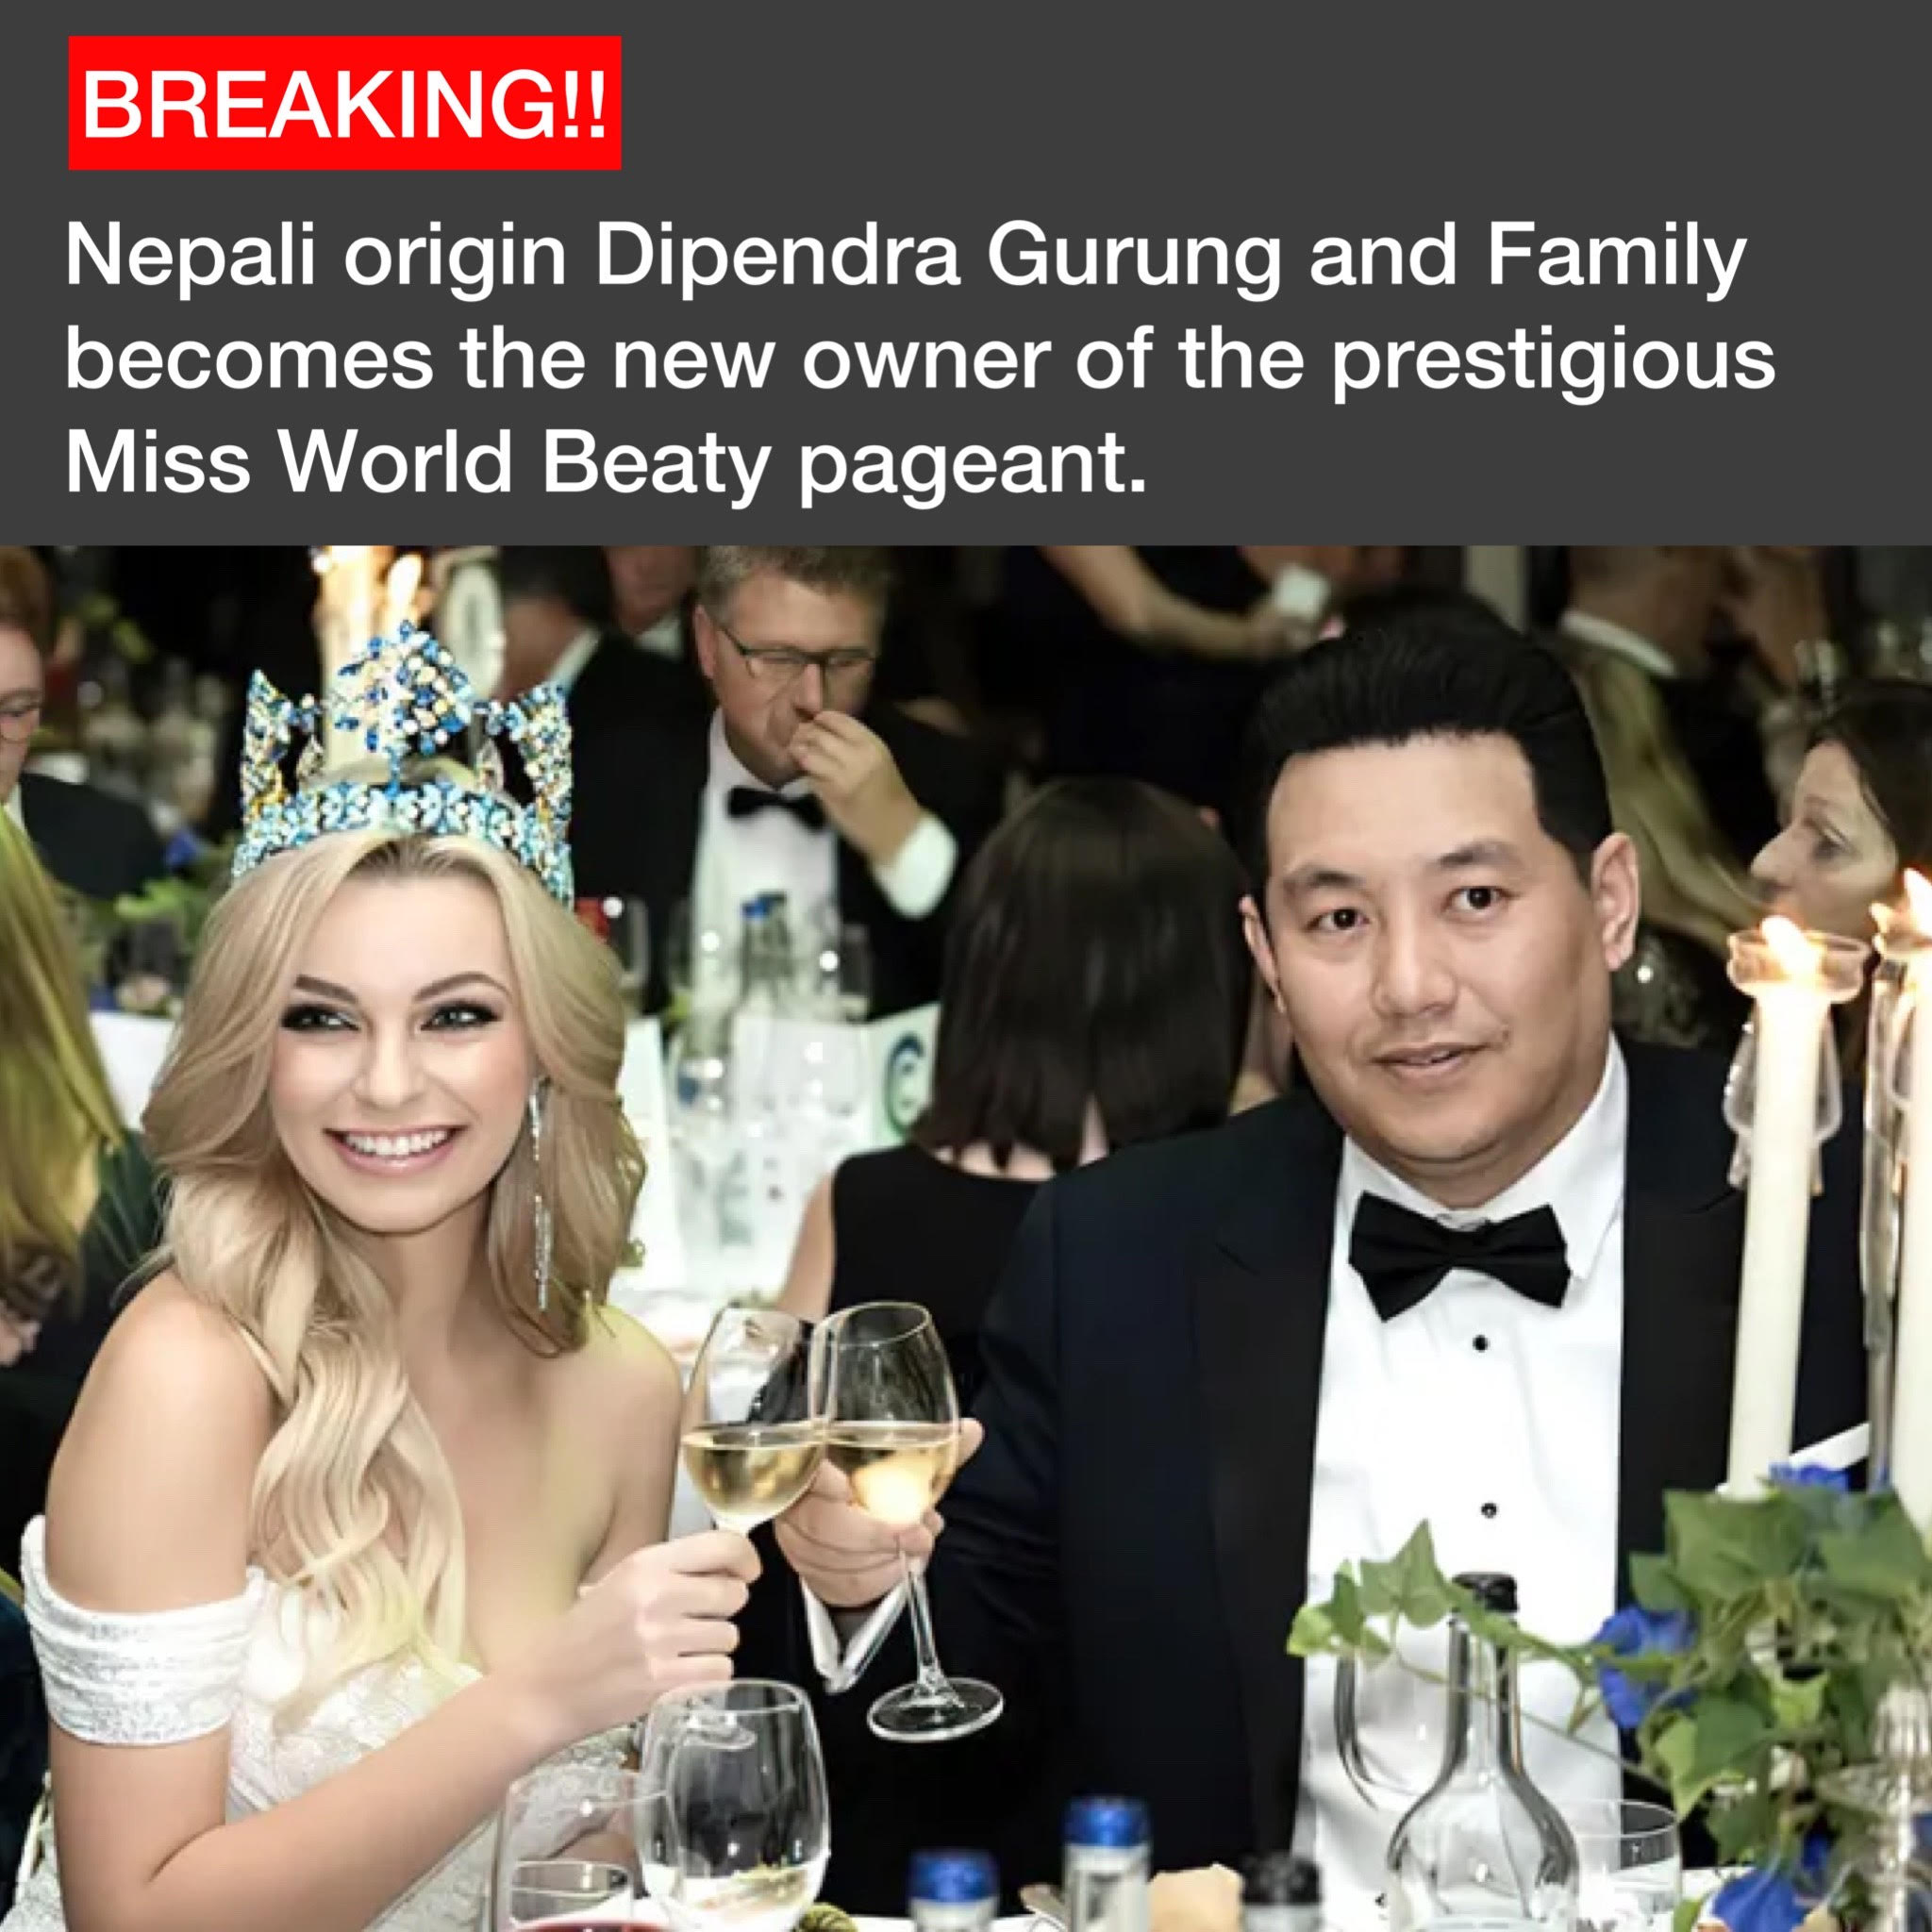 Nepali origin Dipendra Gurung and Family Becomes New Owner of Miss World